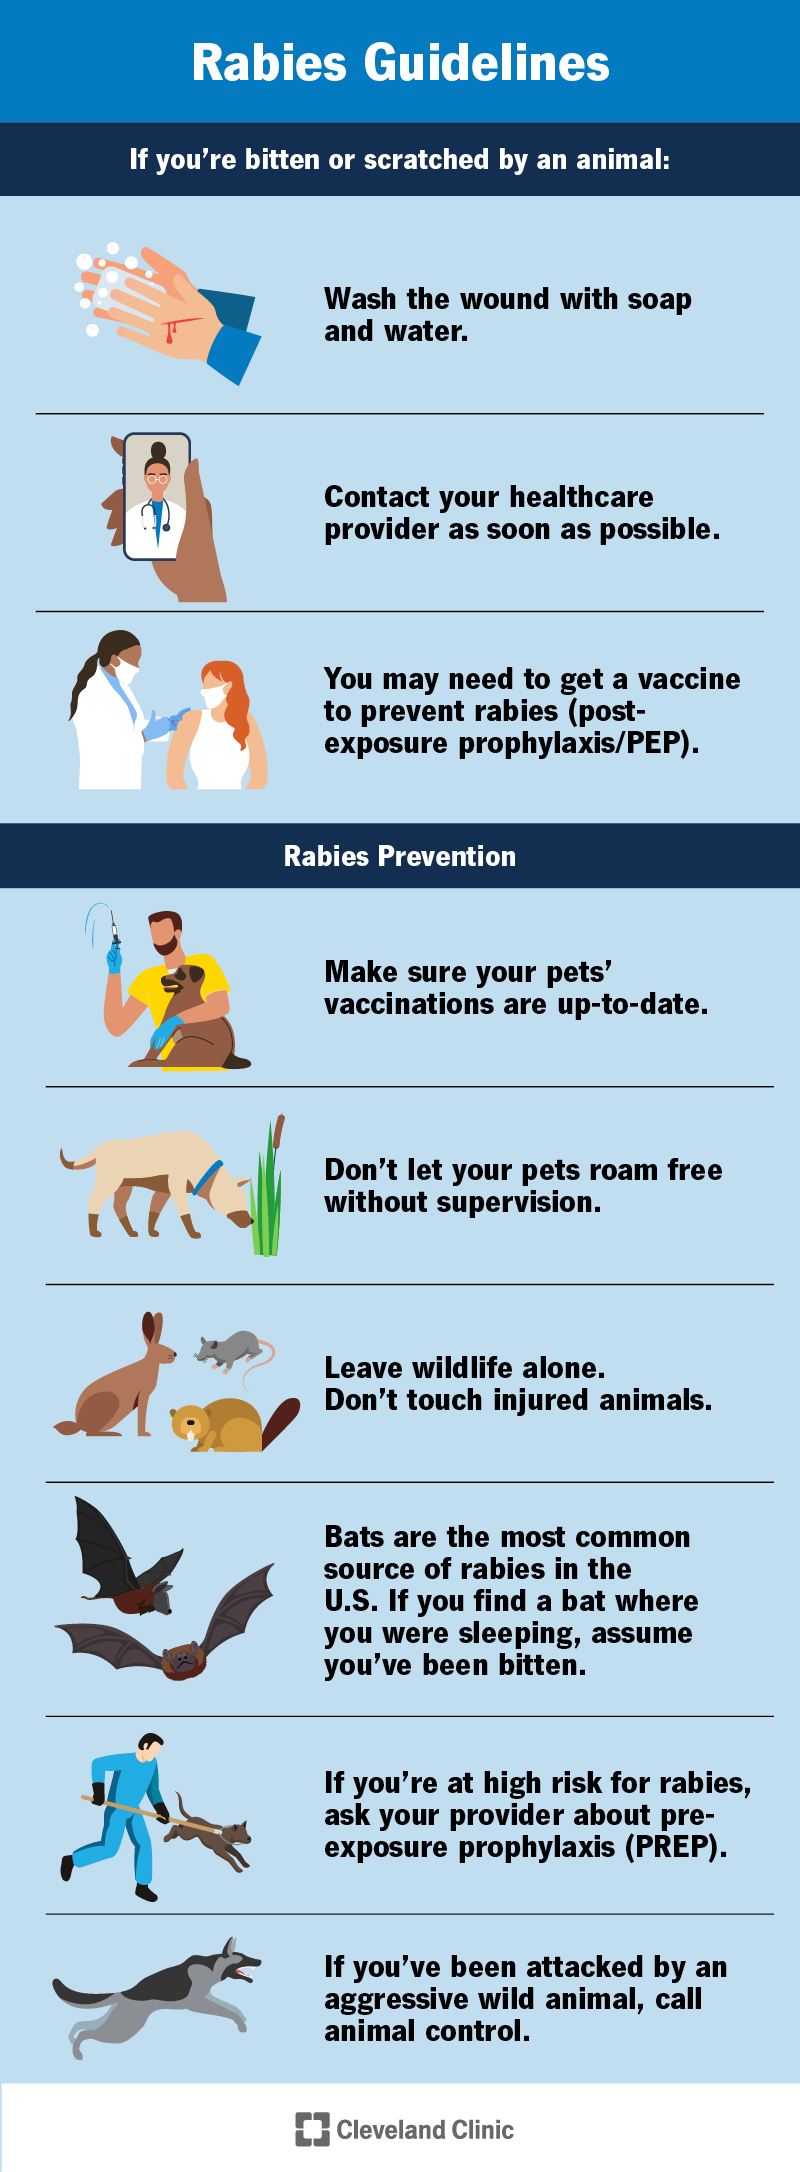 Why we can't cure rabies?